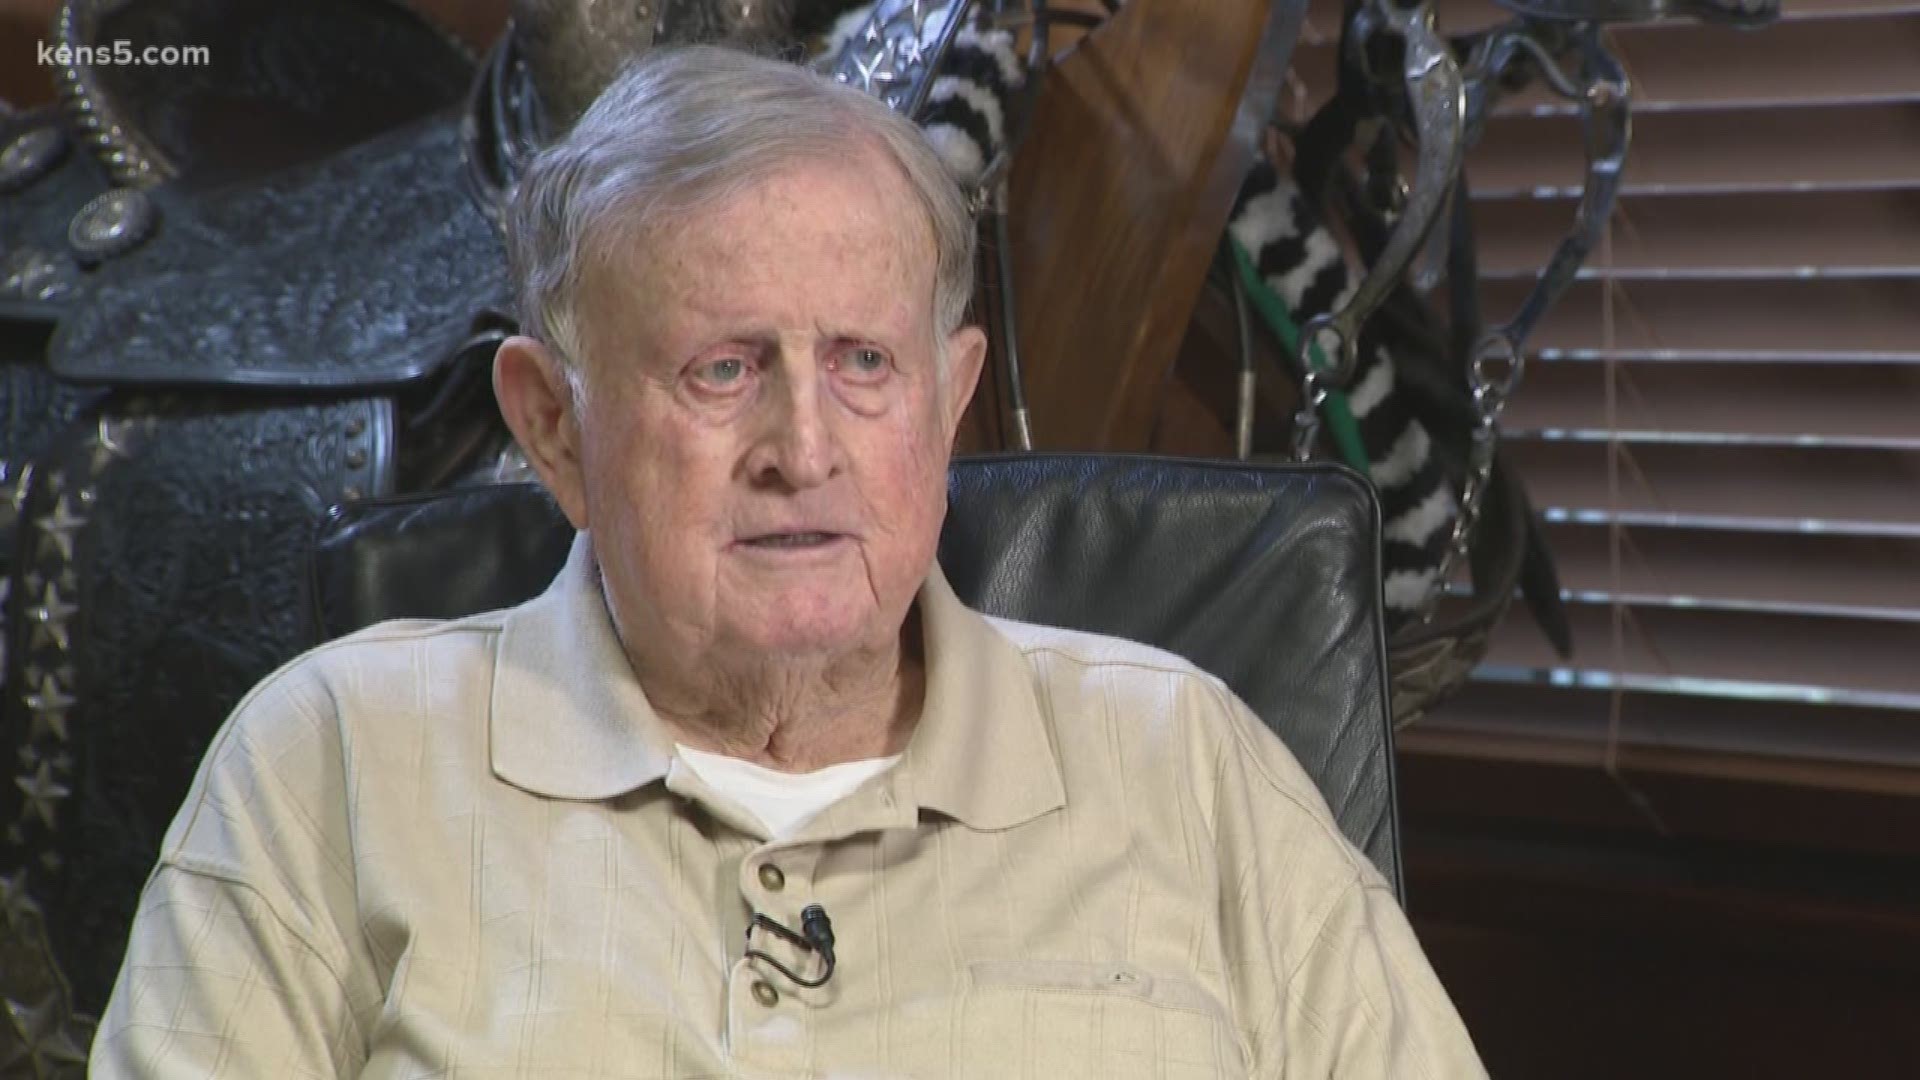 Red McCombs has dominated the auto industry, and now he's giving back to the very same community he helped put on the map